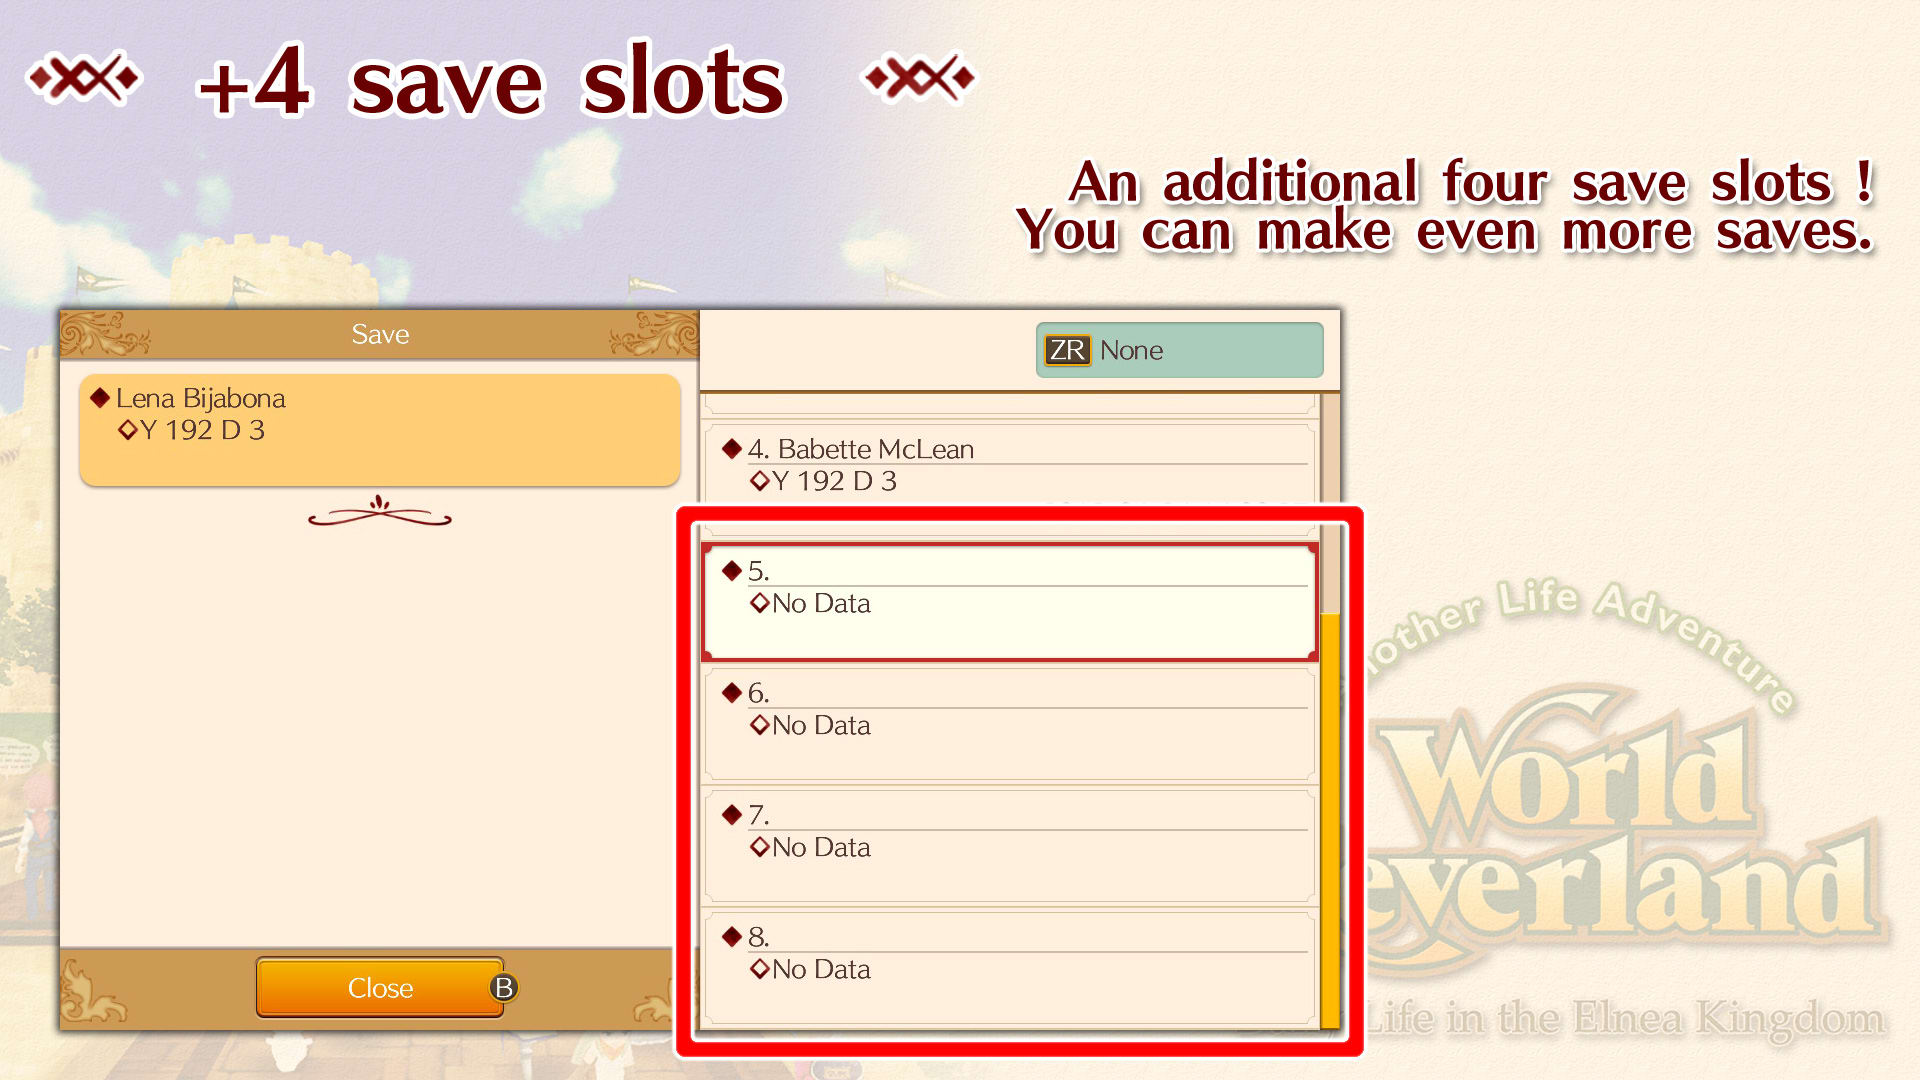 +4 save slots (adds 4 additional save data slots)